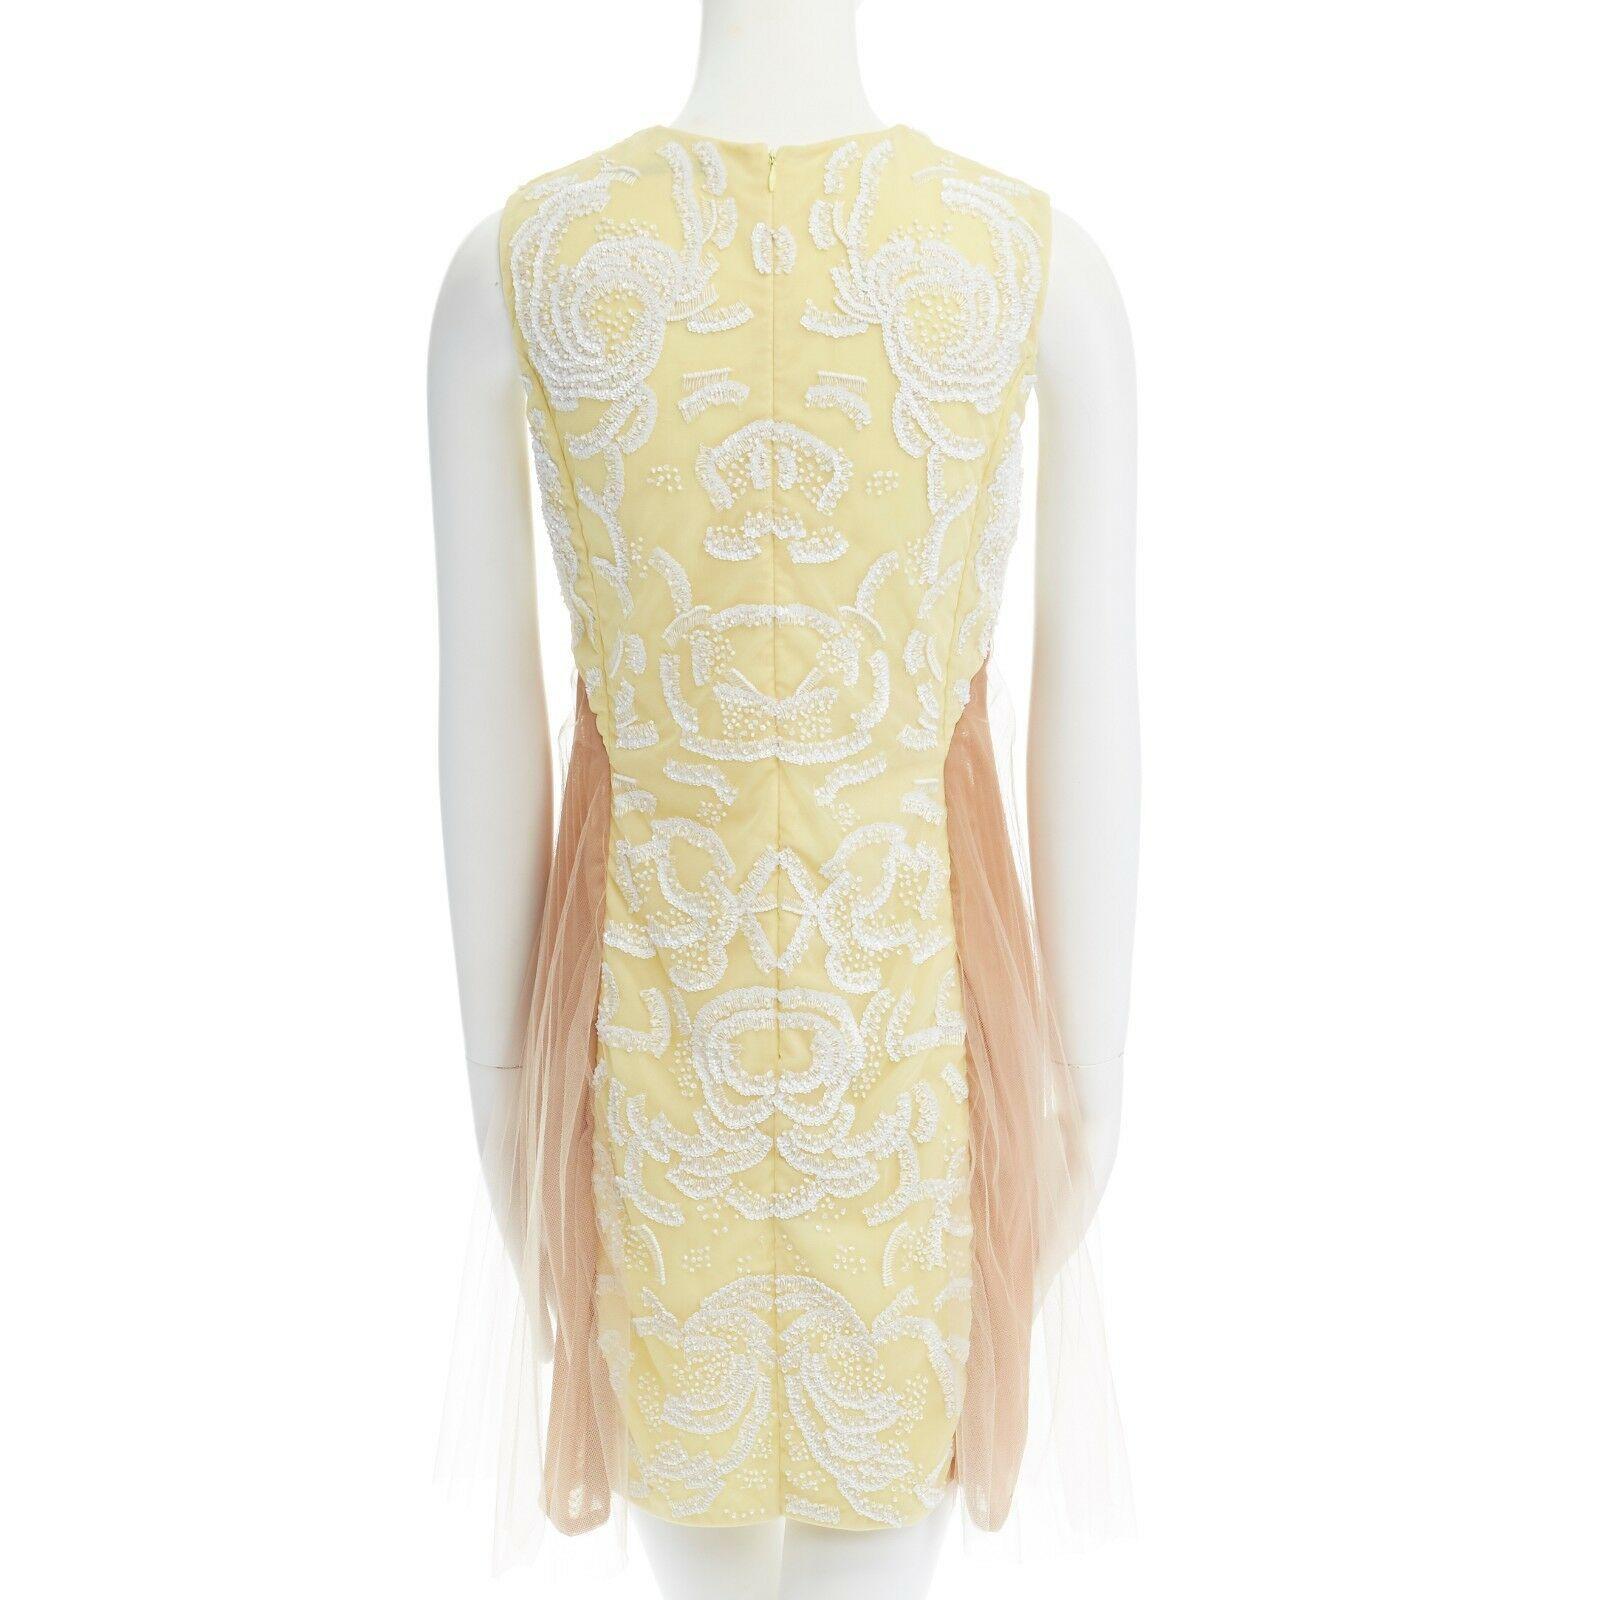 Women's runway CHRISTOPHER KANE SS10 yellow sequins lace nude tulle insert dress UK6 XS